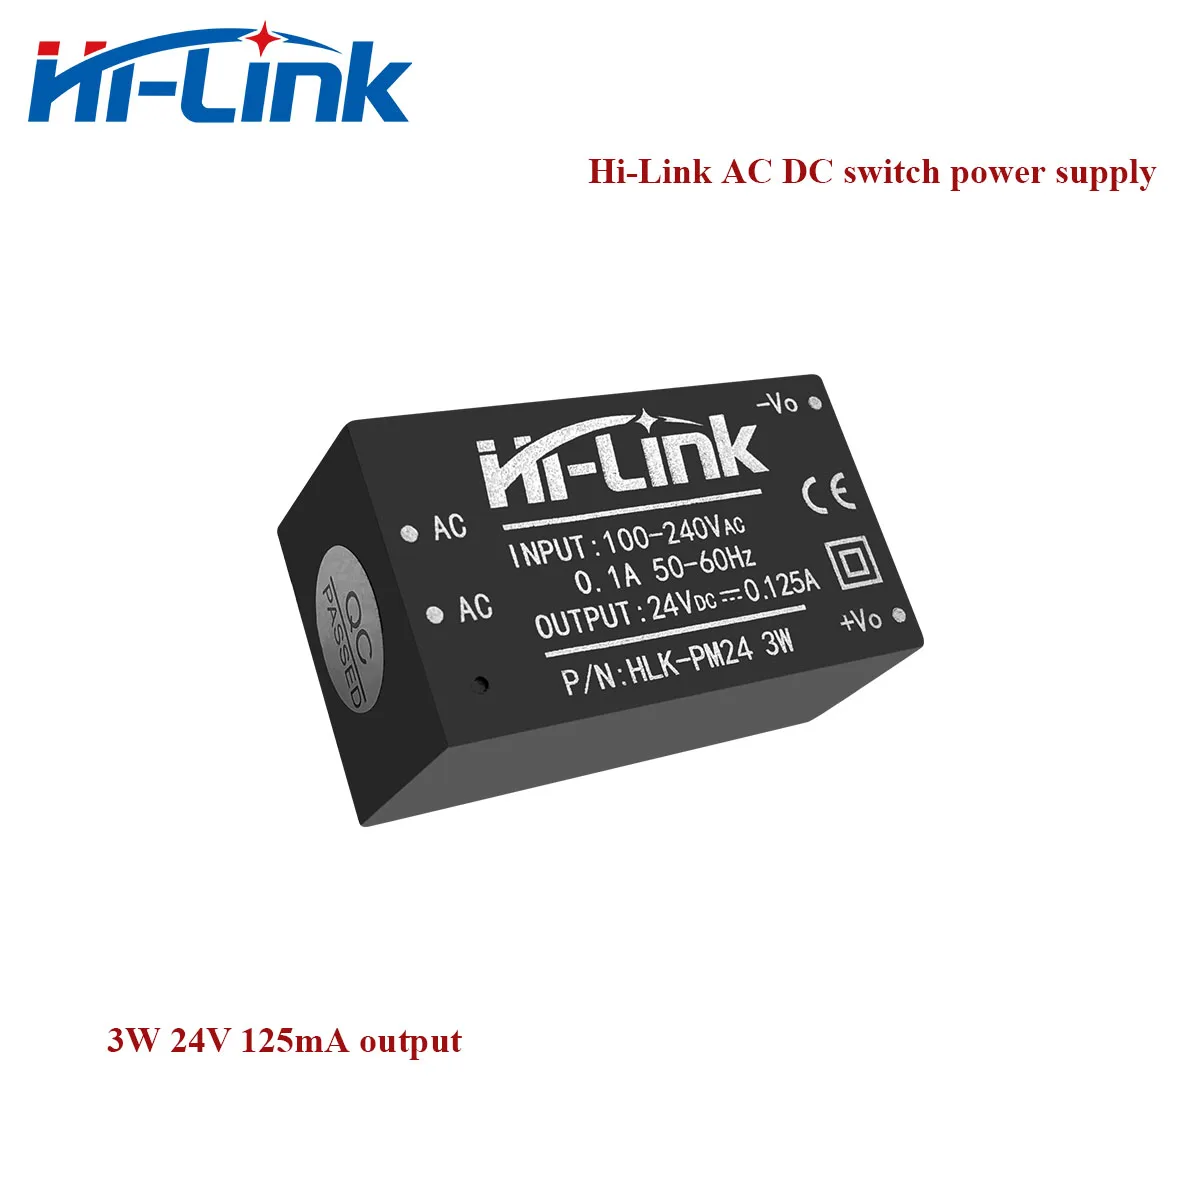 

Hi-Link new HLK-PM24 AC DC converter 220V to 24V 3W Step Down Isolated Switching mode Power Supply Module for IOT